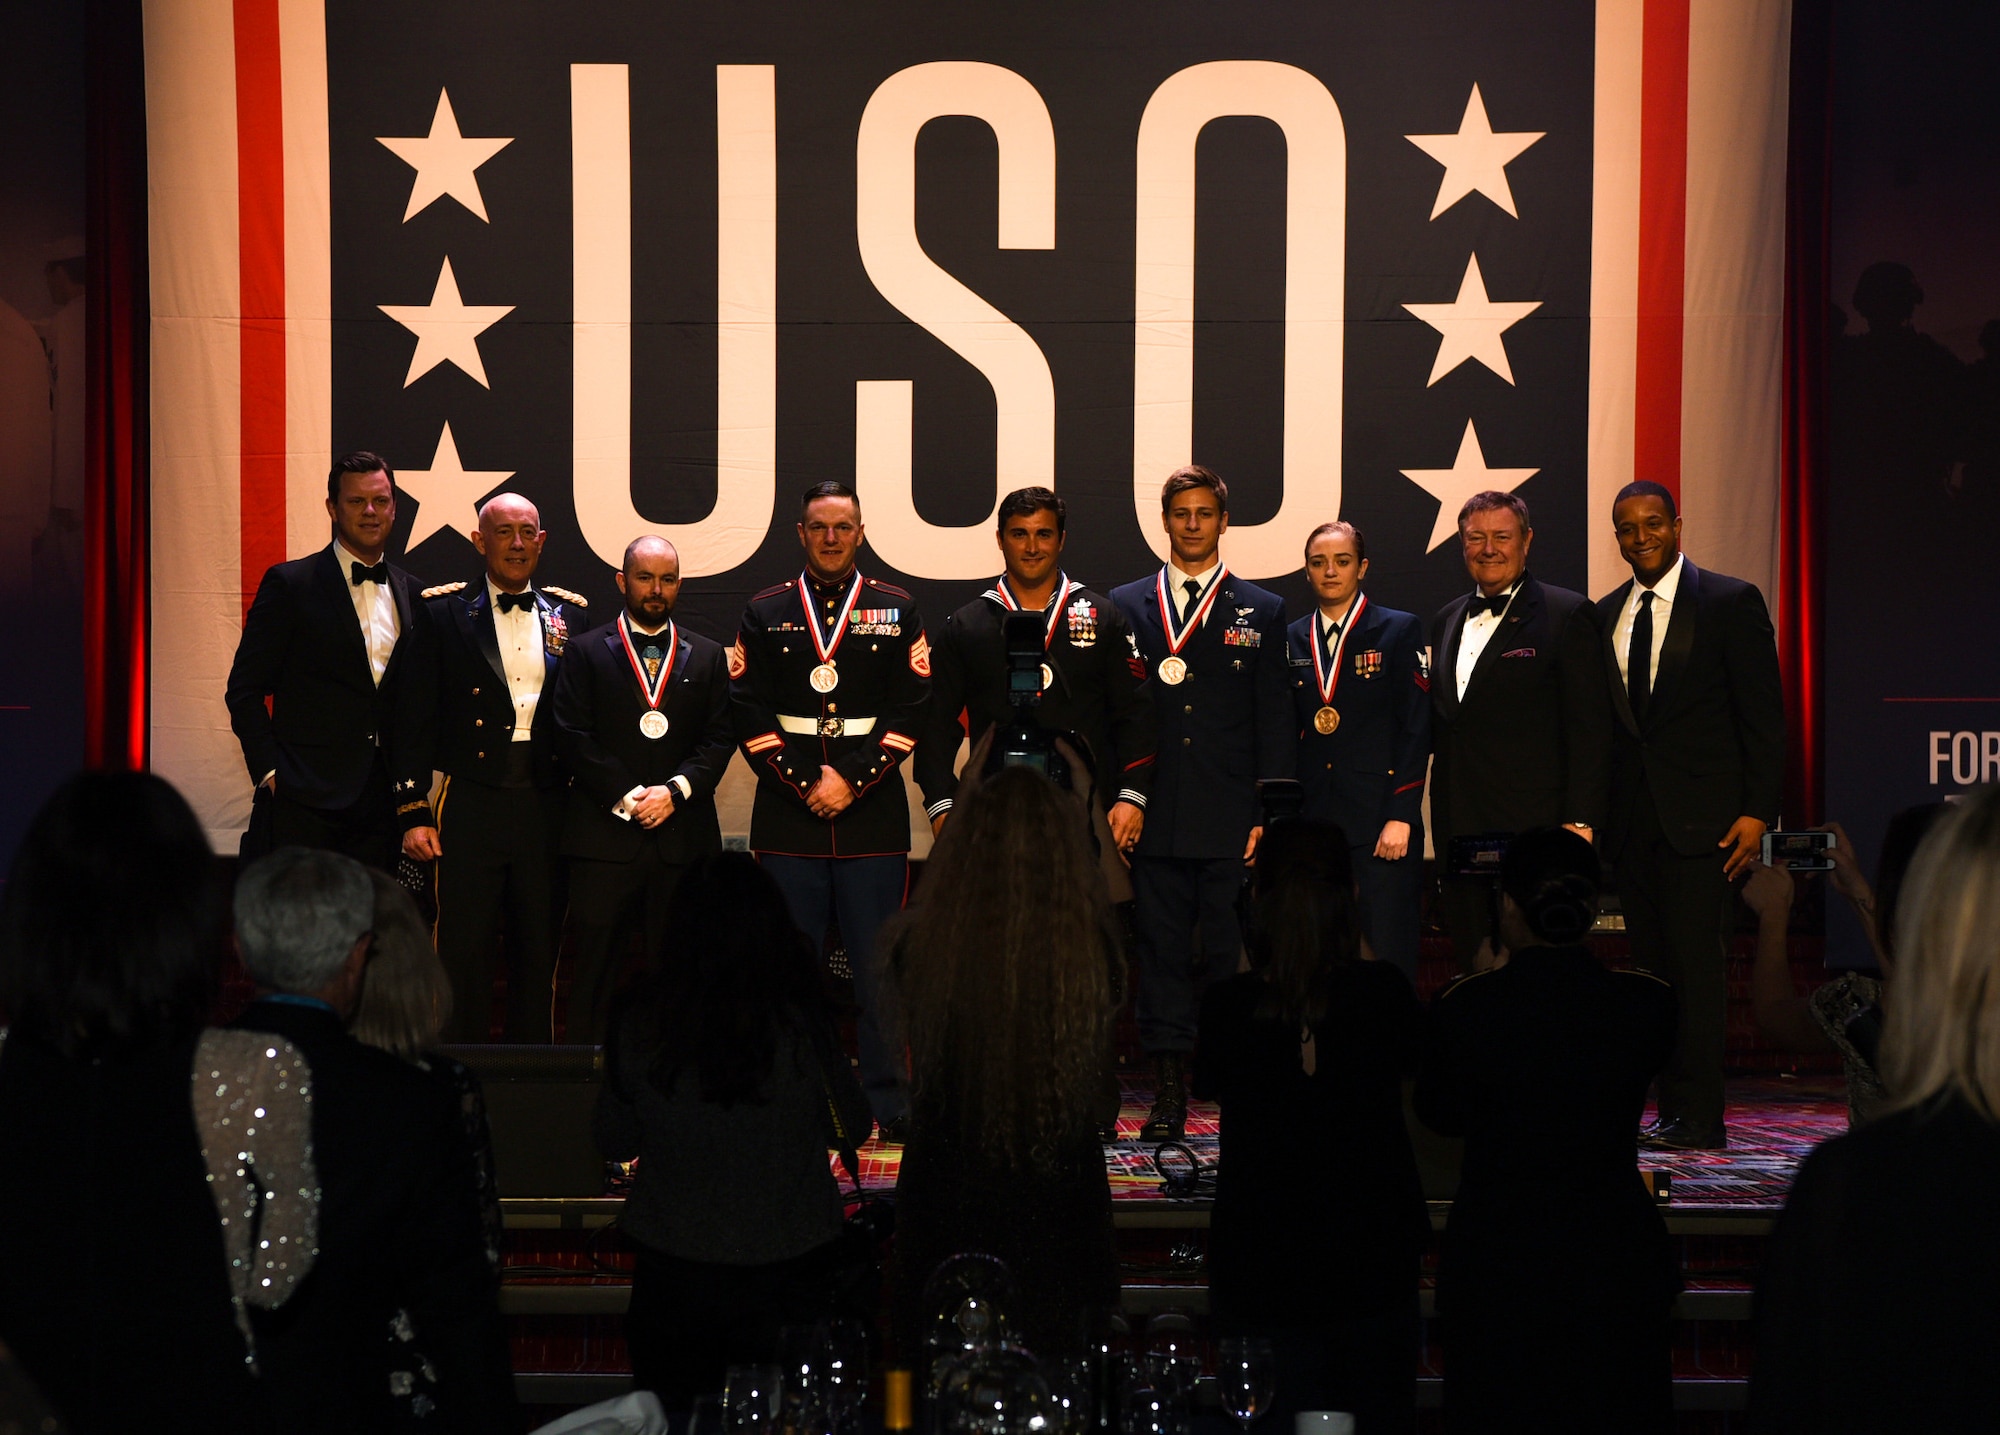 U.S. military members pose for pictures during the 57th Annual USO Armed Forces Gala at the New York Marriott Marquis in New York City, Dec. 12, 2018. Five service members were awarded a medal by the USO for risking their lives to help others in deadly situations. (U.S. Air Force photo by Airman 1st Class Ariel Owings)